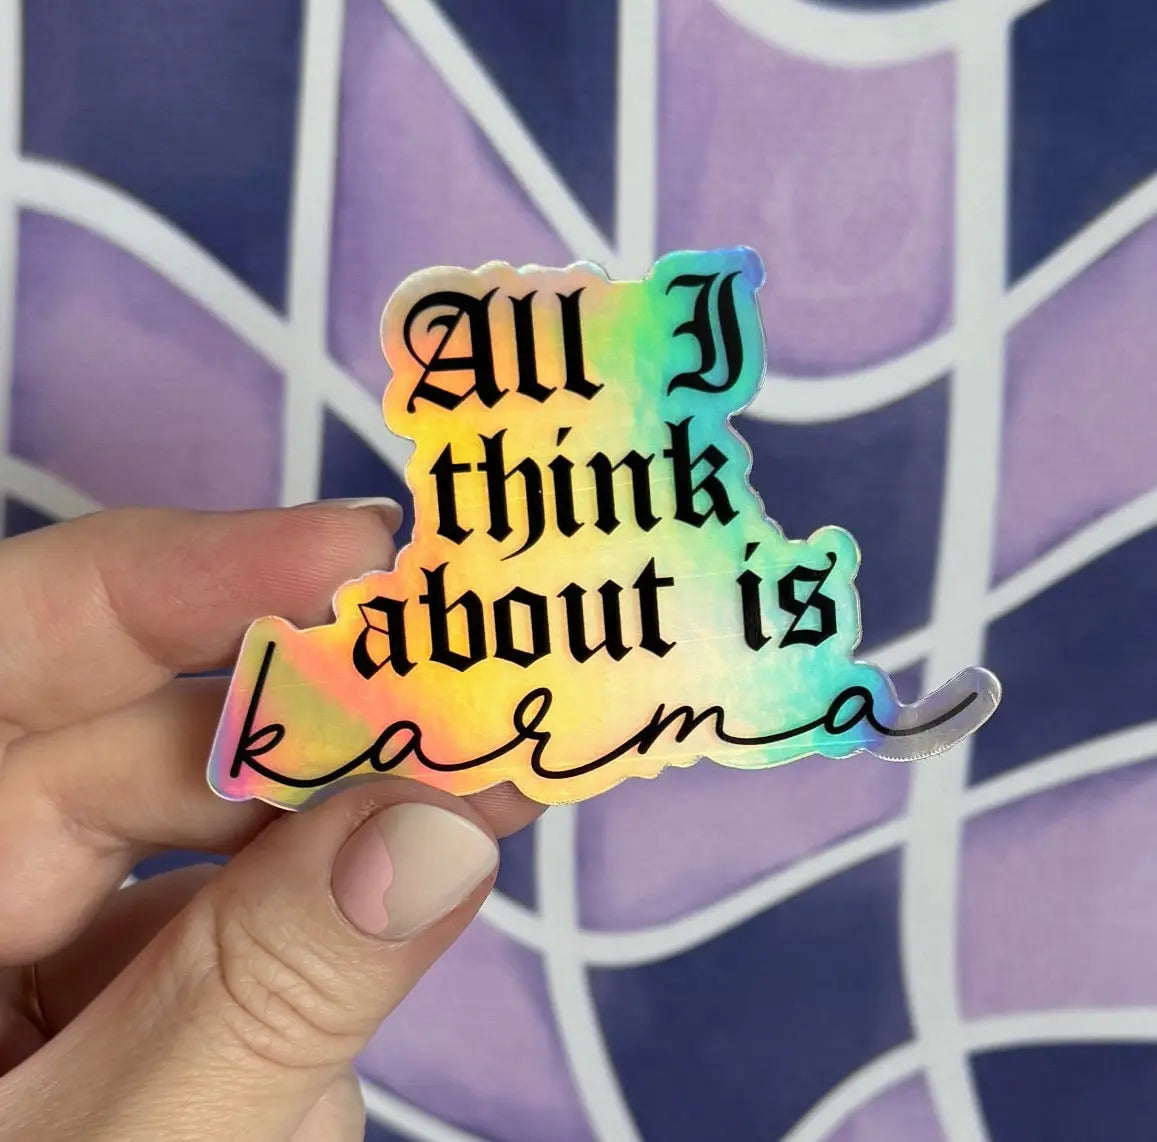 All I think about it karma sticker MangoIllustrated